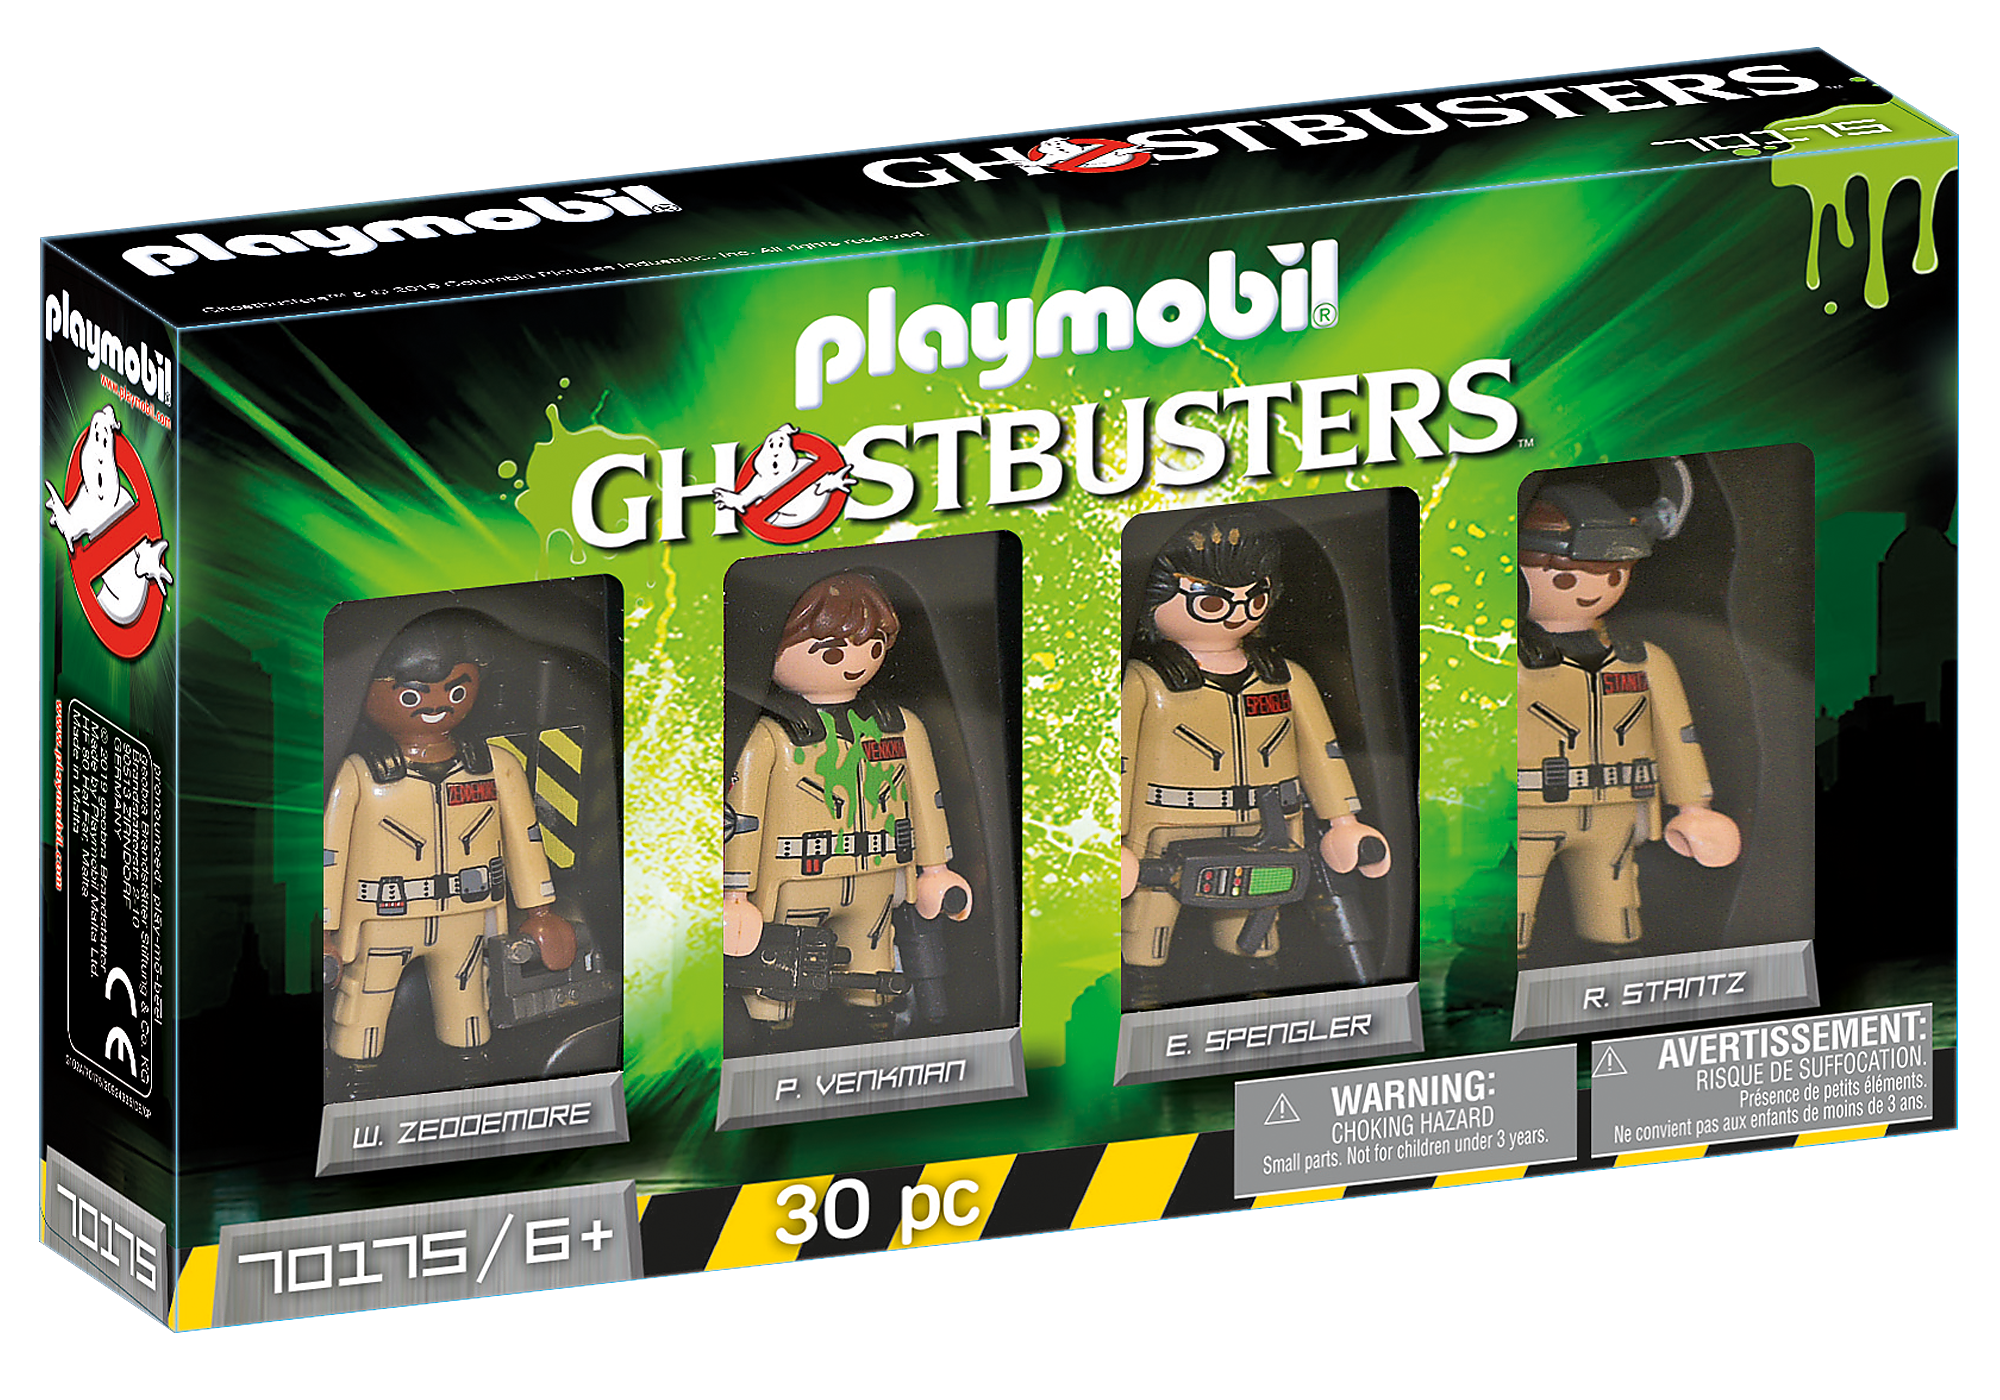 Playmobil Ghostbusters - Page 3 Ghostbusters%E2%84%A2%20%20Edition%20Collector%20Ghostbusters%20?locale=fr-FR,fr,*&$pdp_product_main_xl$&strip=true&qlt=80&fmt.jpeg.chroma=1,1,1&unsharp=0,1,1,7&fmt.jpeg